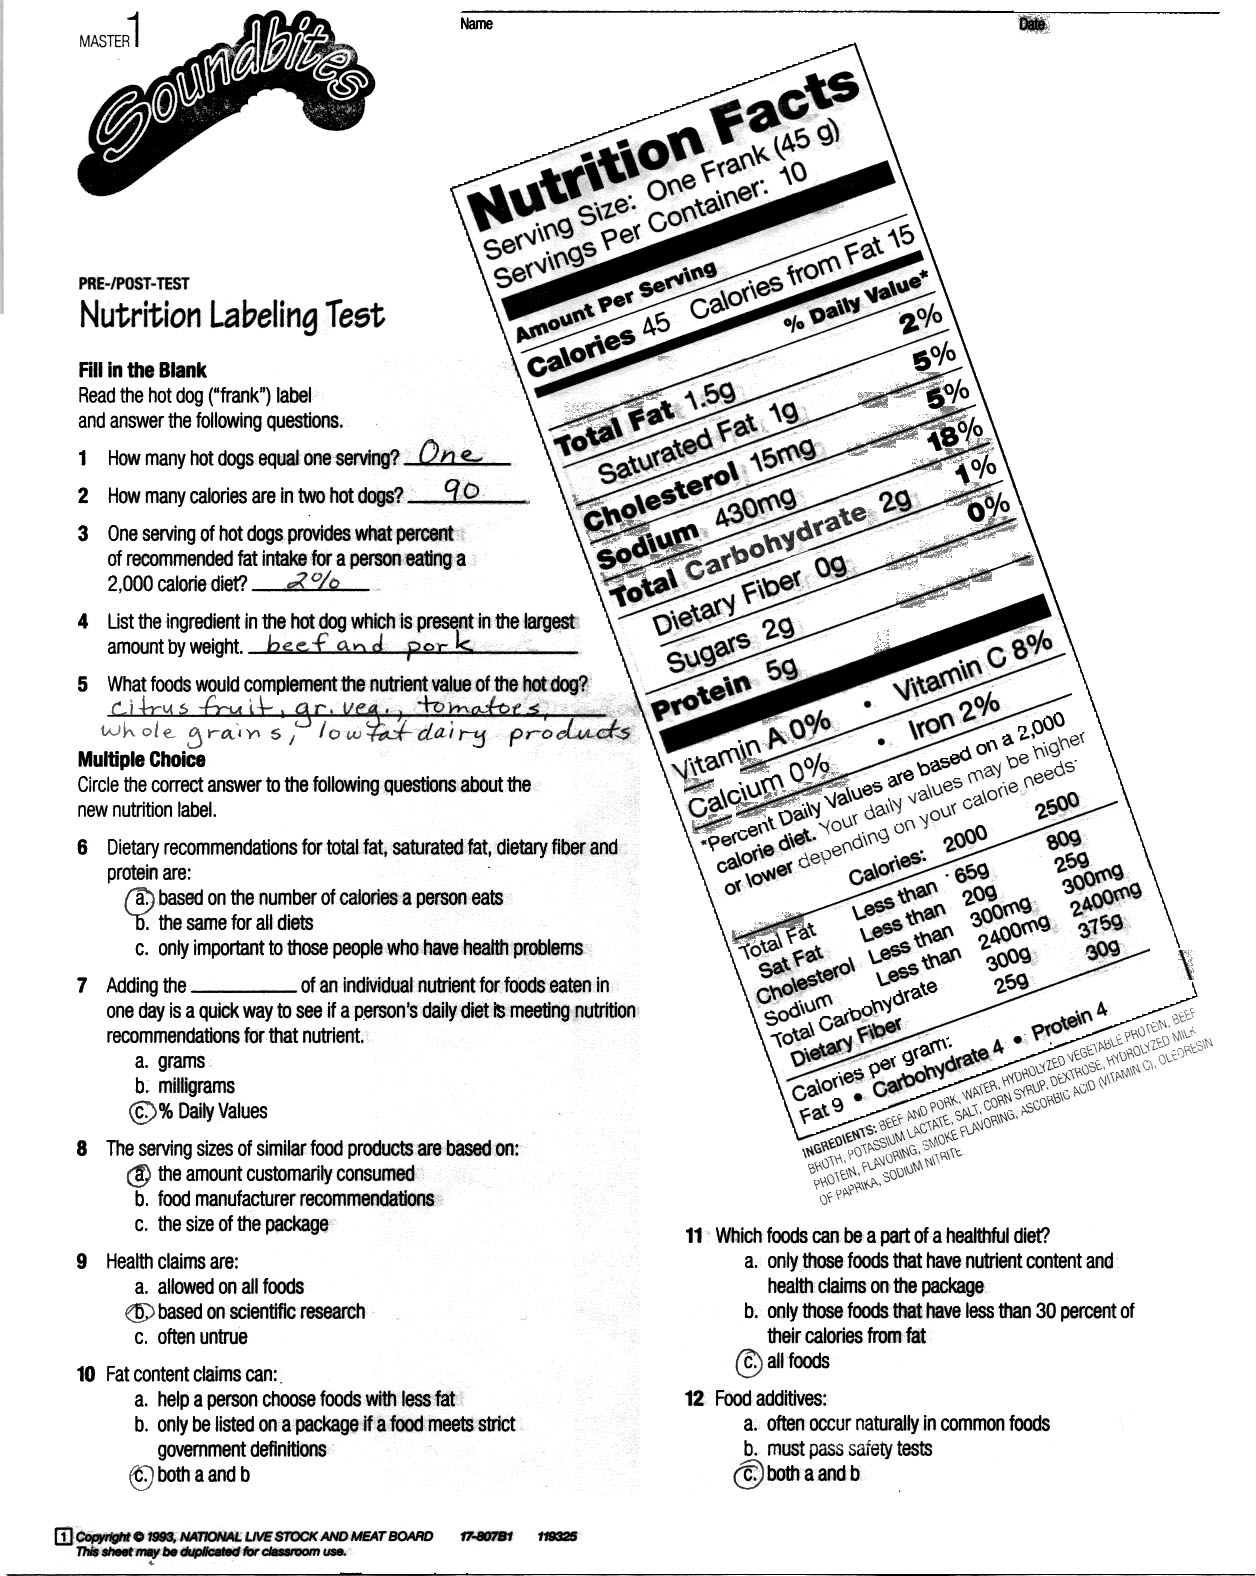 Nutrition Label Worksheet Nscsd Answers - Juleteagyd For Nutrition Label Worksheet Answers